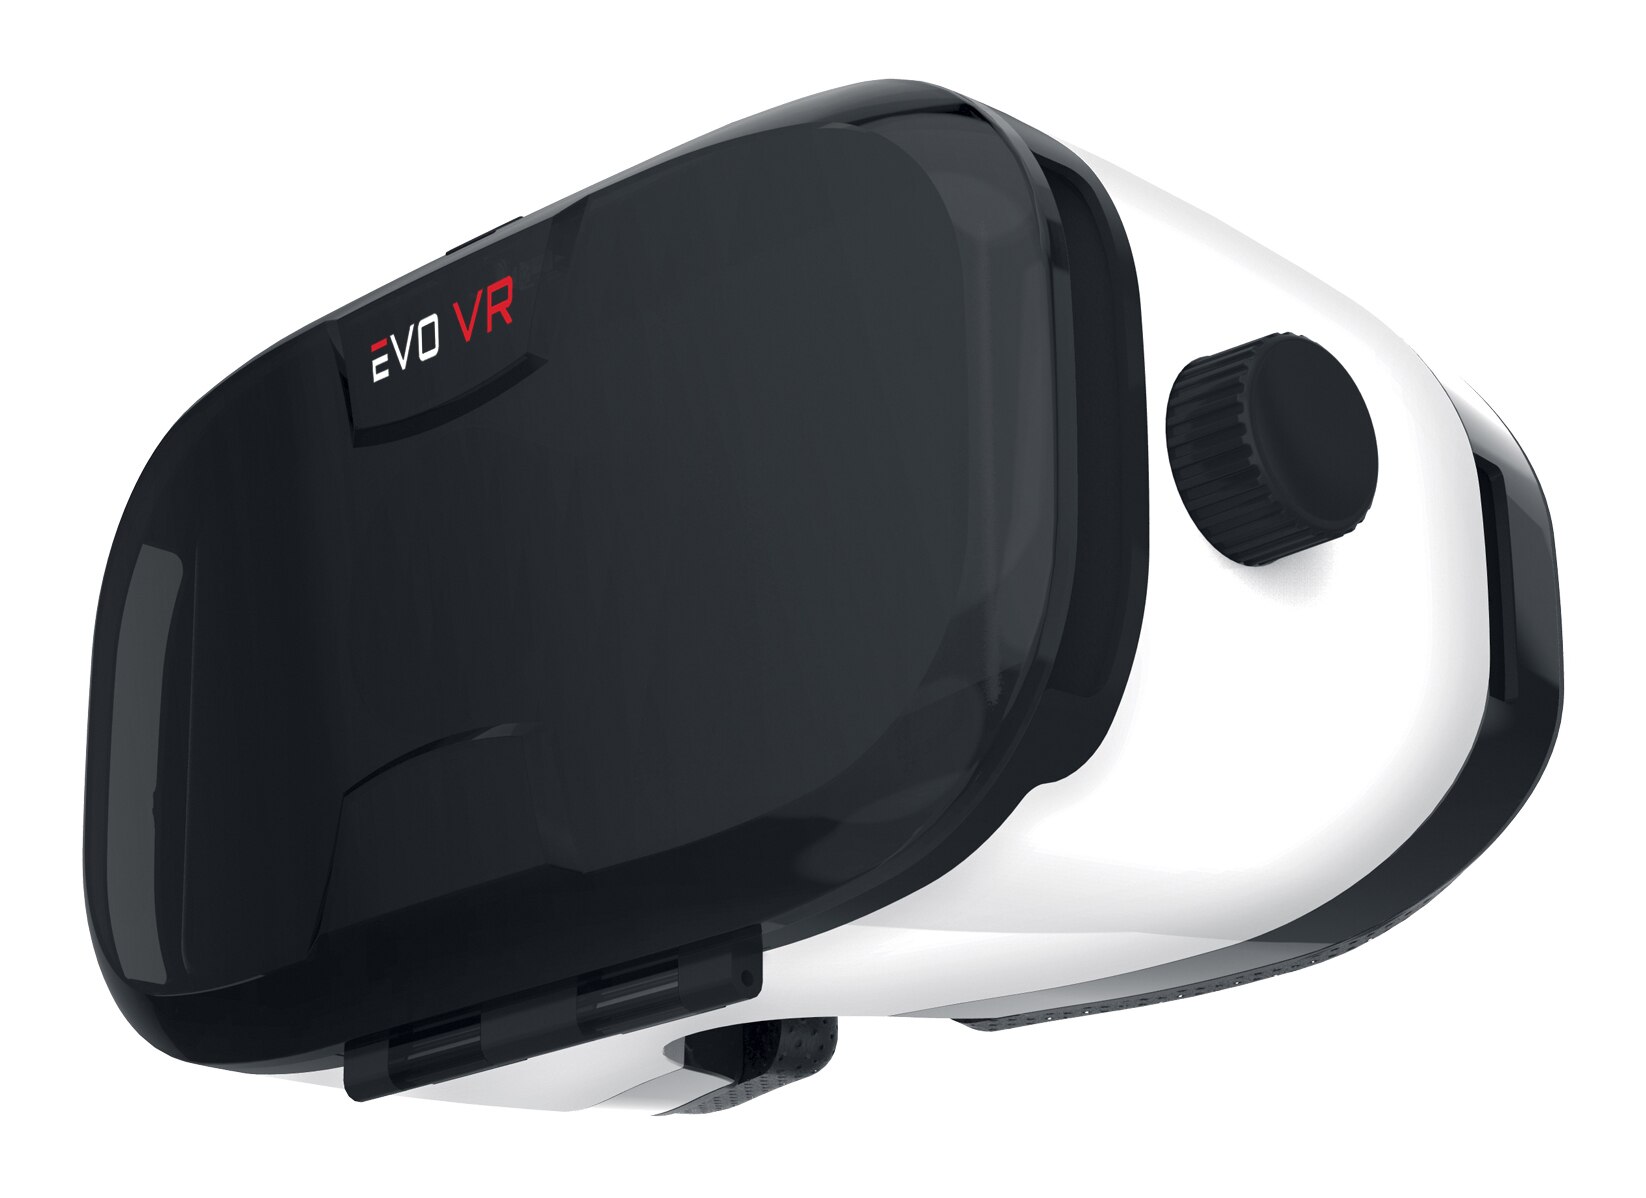 evo vr supported phones